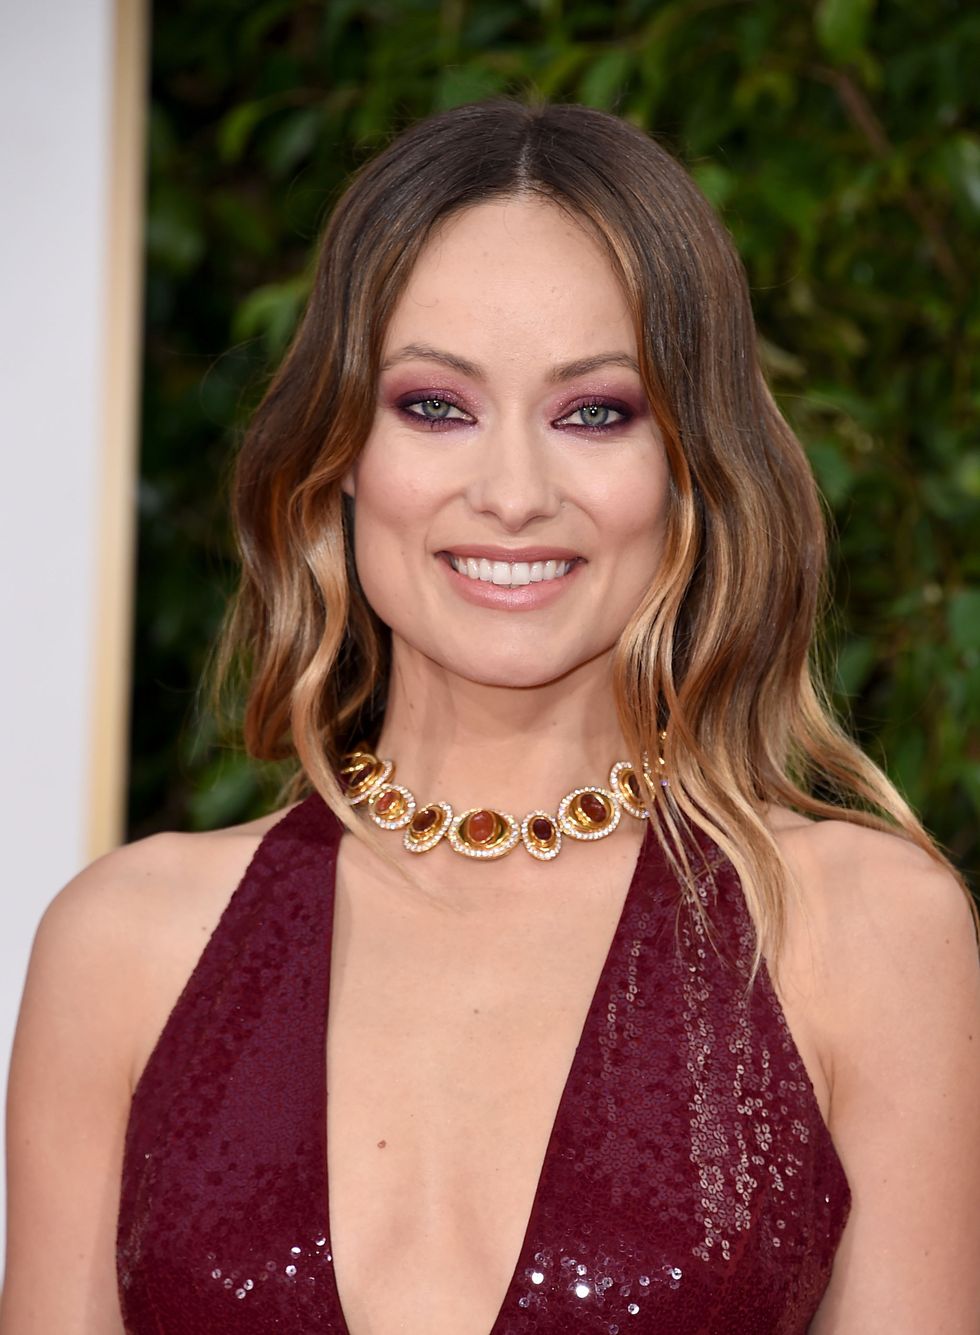 BEVERLY HILLS, CA - JANUARY 10:  Actress Olivia Wilde attends the 73rd Annual Golden Globe Awards held at the Beverly Hilton Hotel on January 10, 2016 in Beverly Hills, California.  (Photo by Steve Granitz/WireImage)